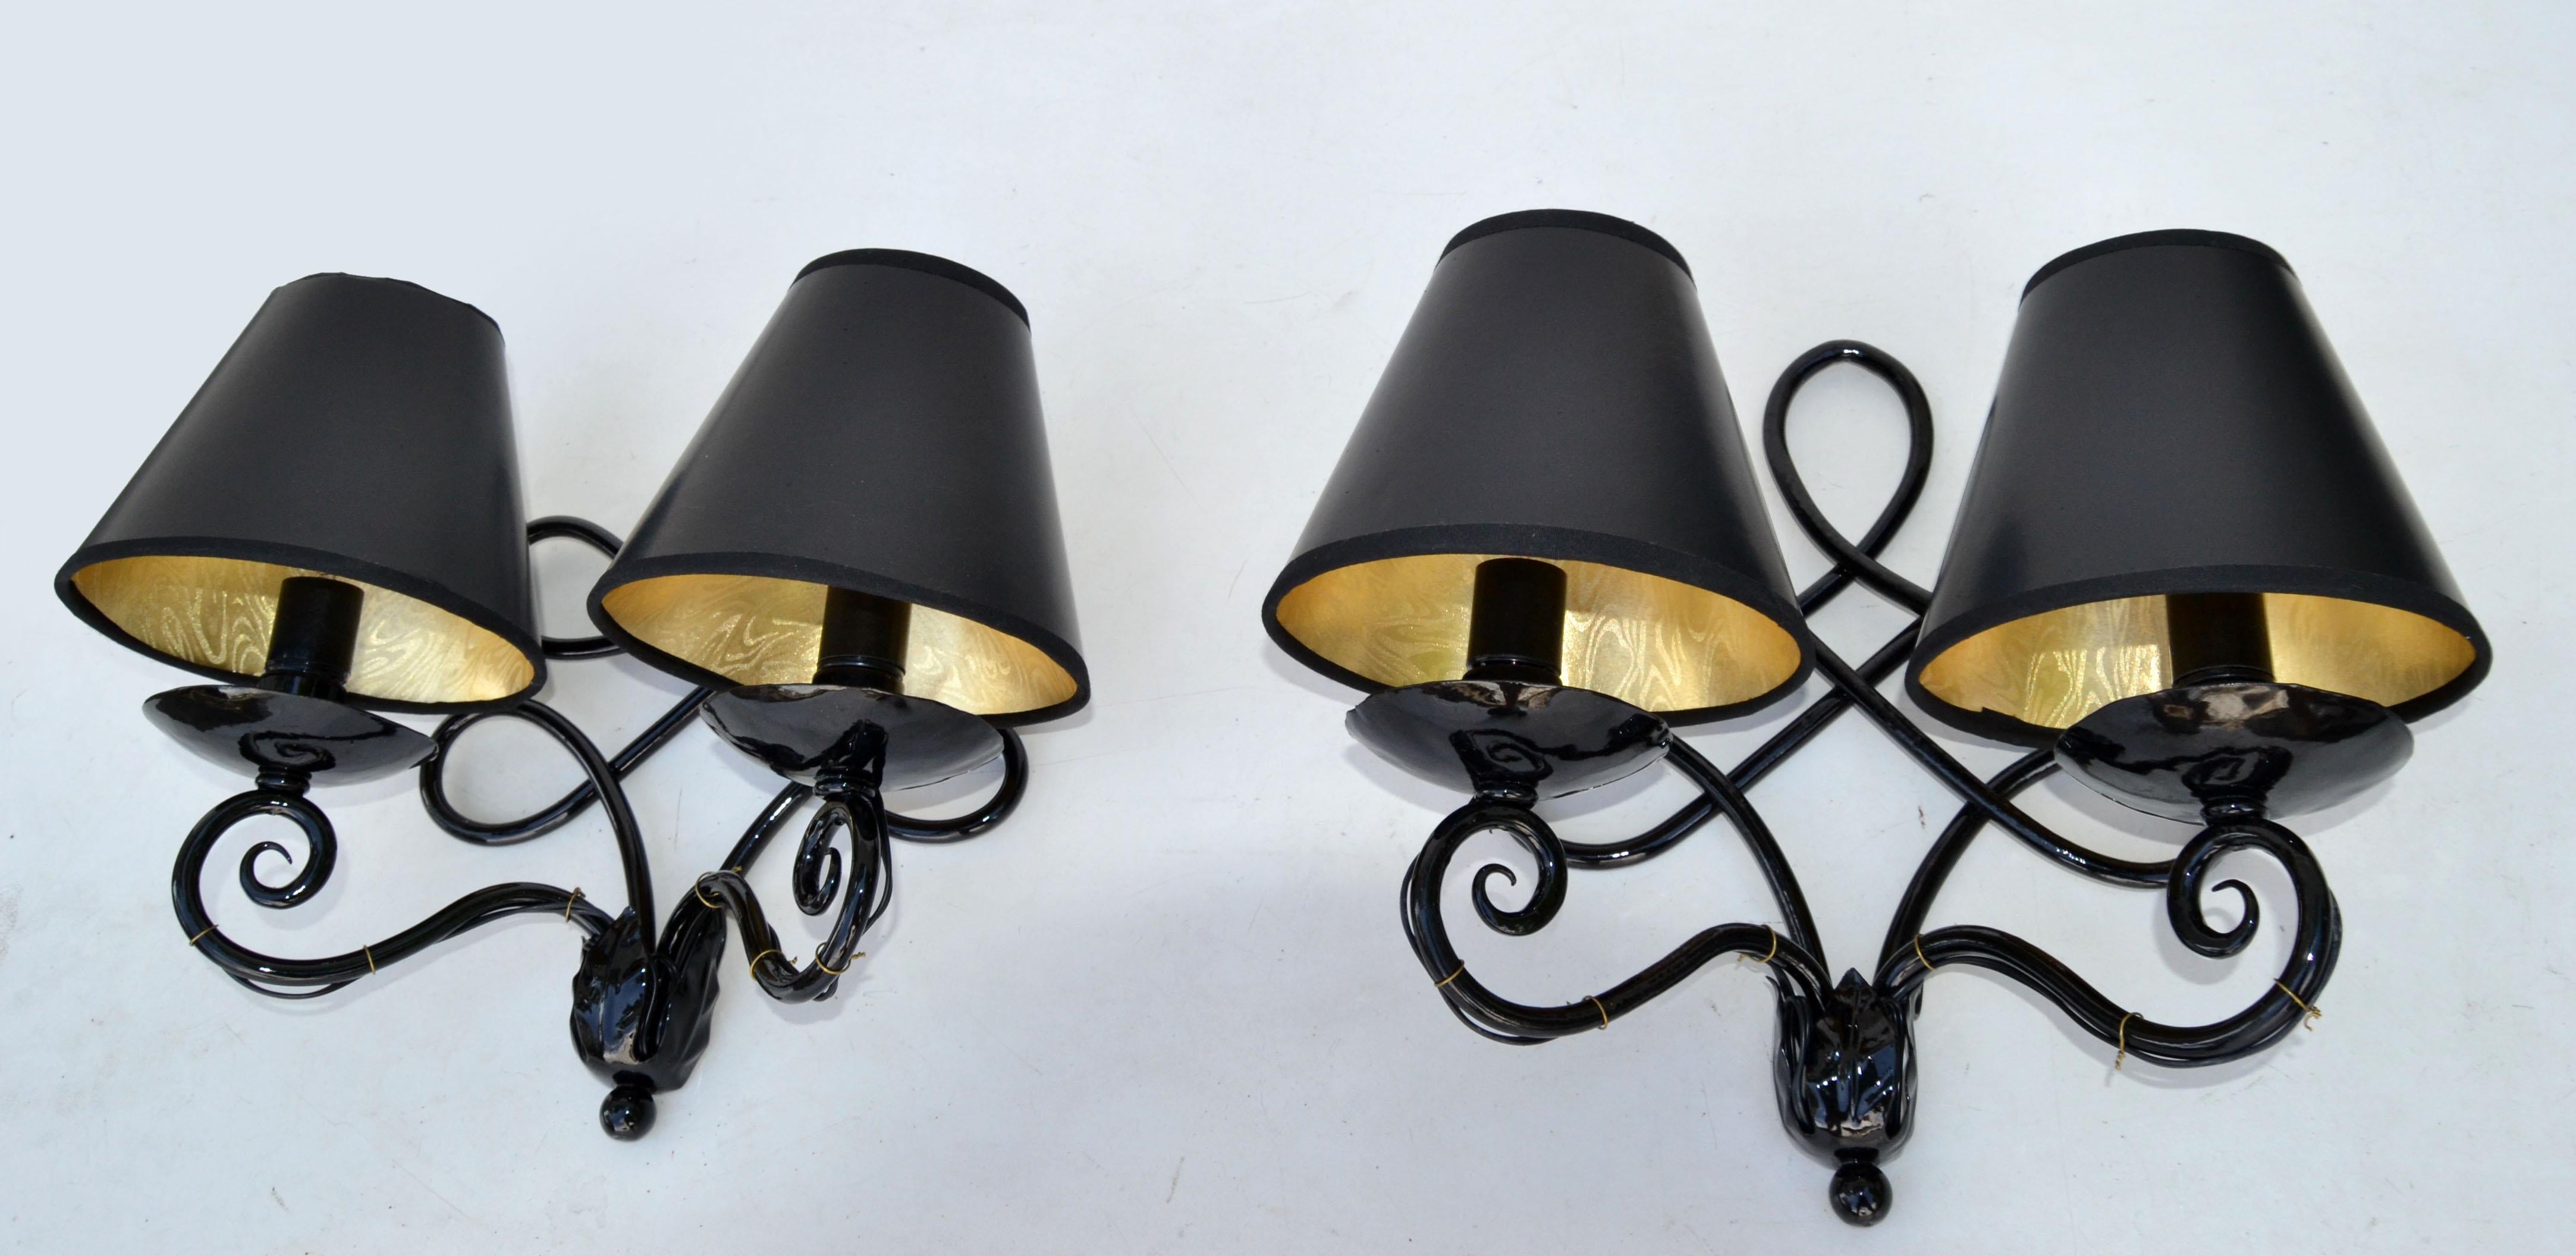 1940 French 2 Lights Wrought Iron Wall Sconces Black Gloss Finish Art Deco, Pair 2